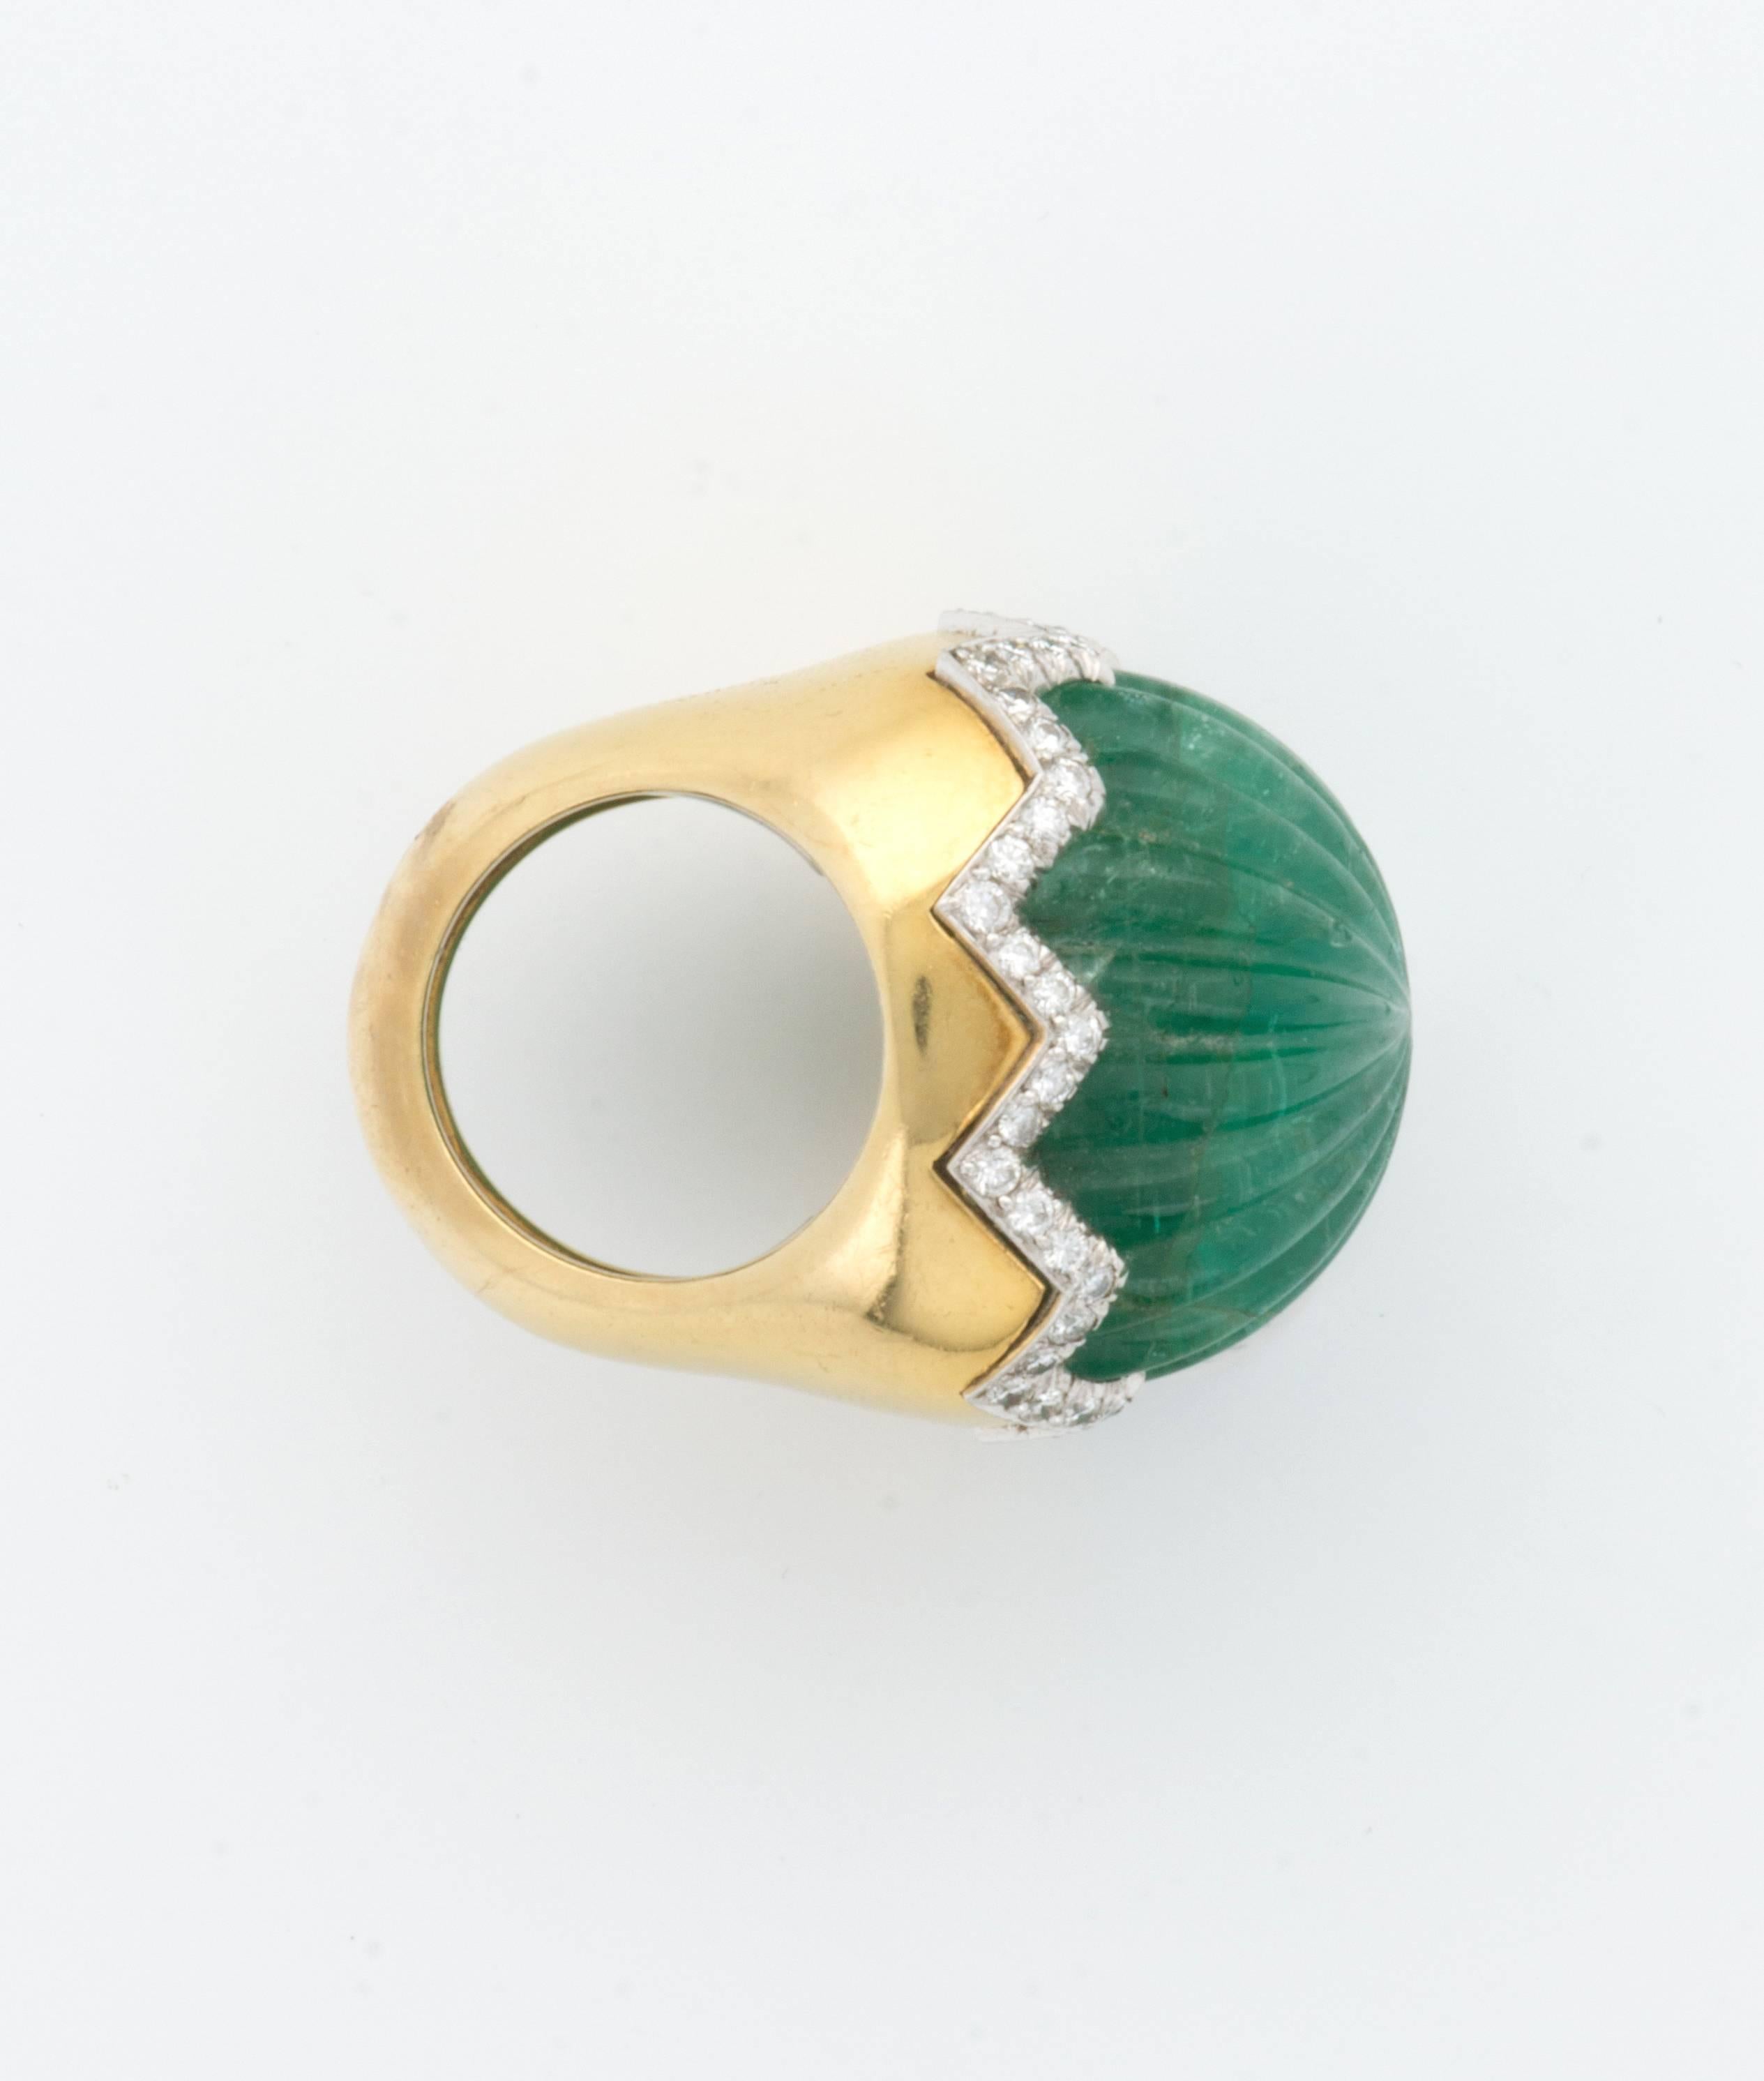 A highly unusual carved Emerald dome ring with zig-zag diamonds in 18k yellow gold by David Webb. 

Approximate 40 carat emerald.

1960's